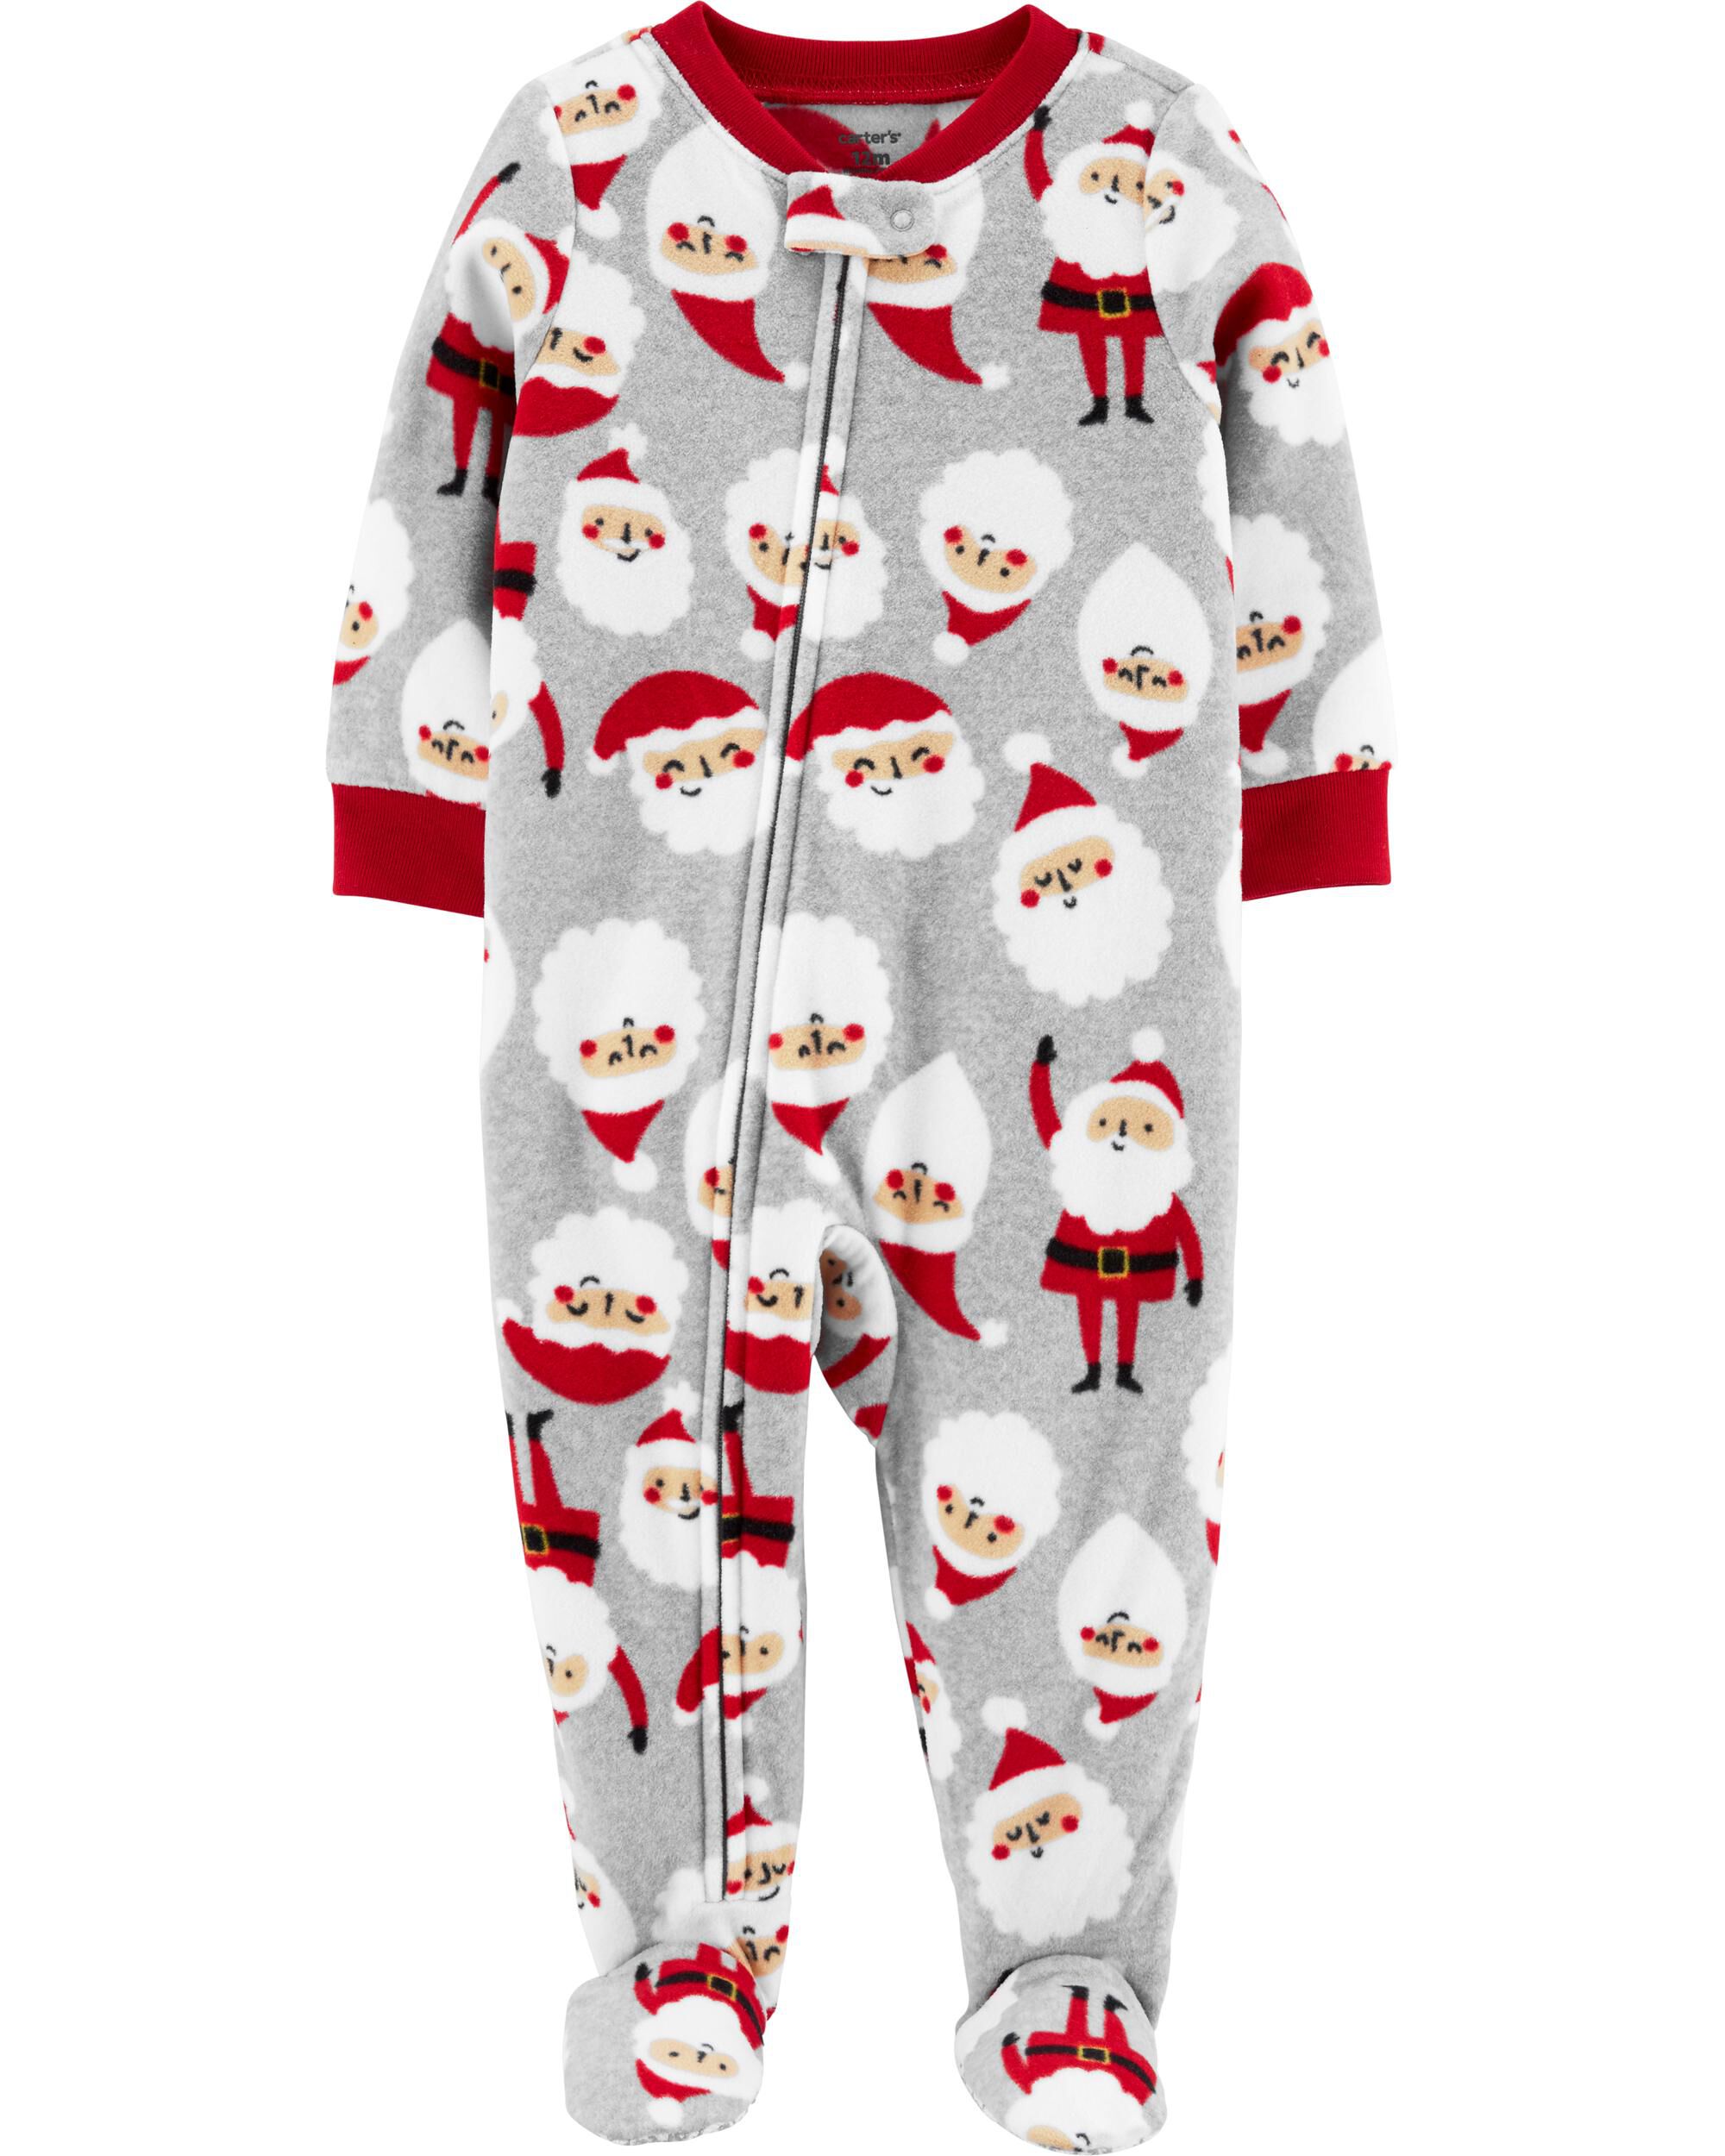 Details about   NWT CARTER'S ON THE NICE LIST FOOTED PAJAMAS SIZE 18M SANTA